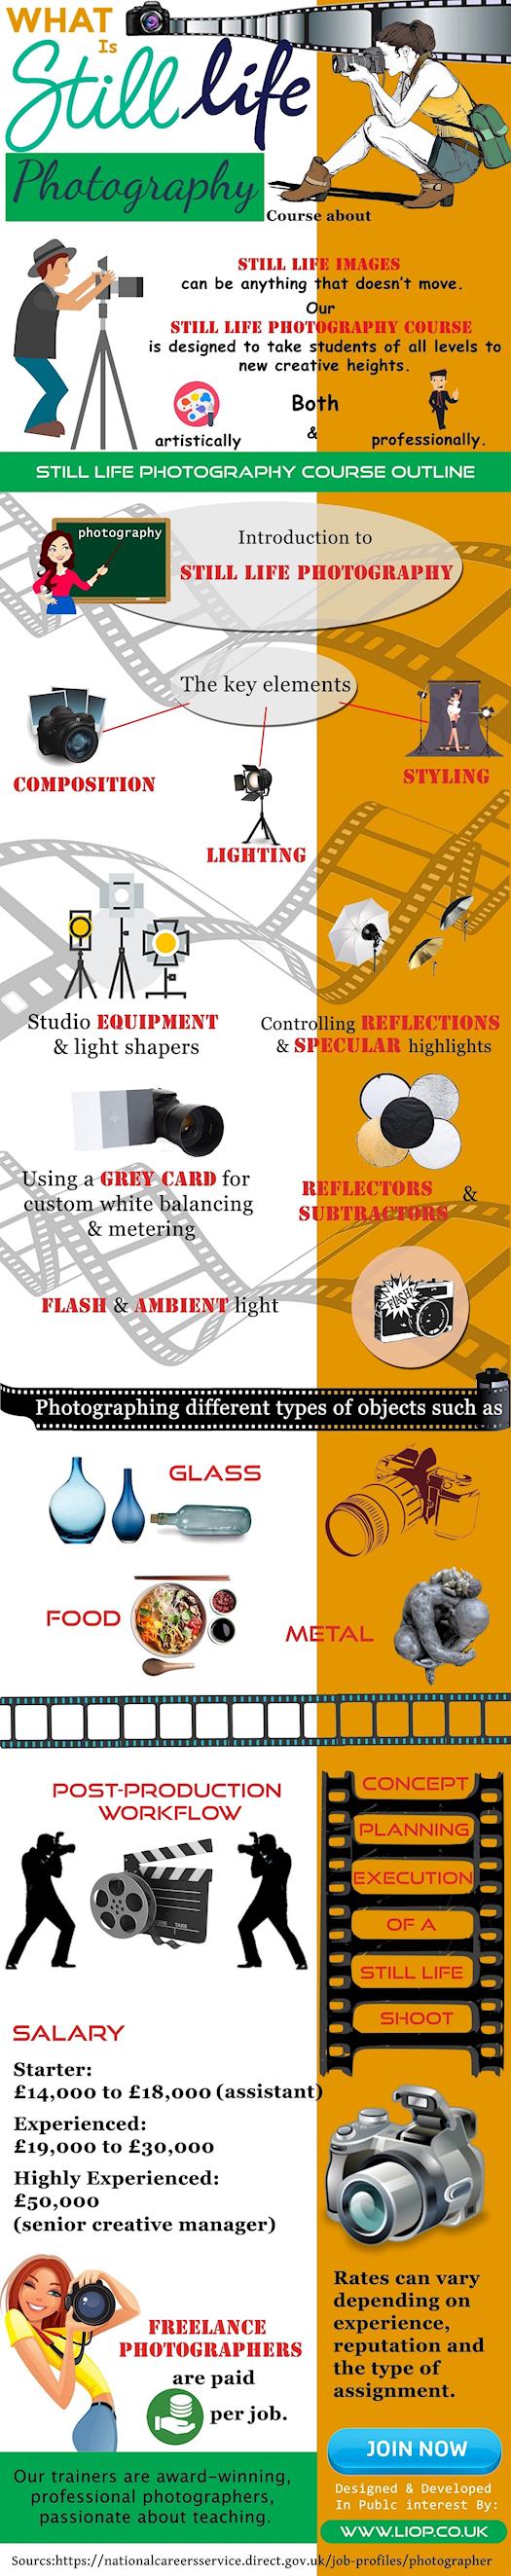 What is Still Life Photography Course about